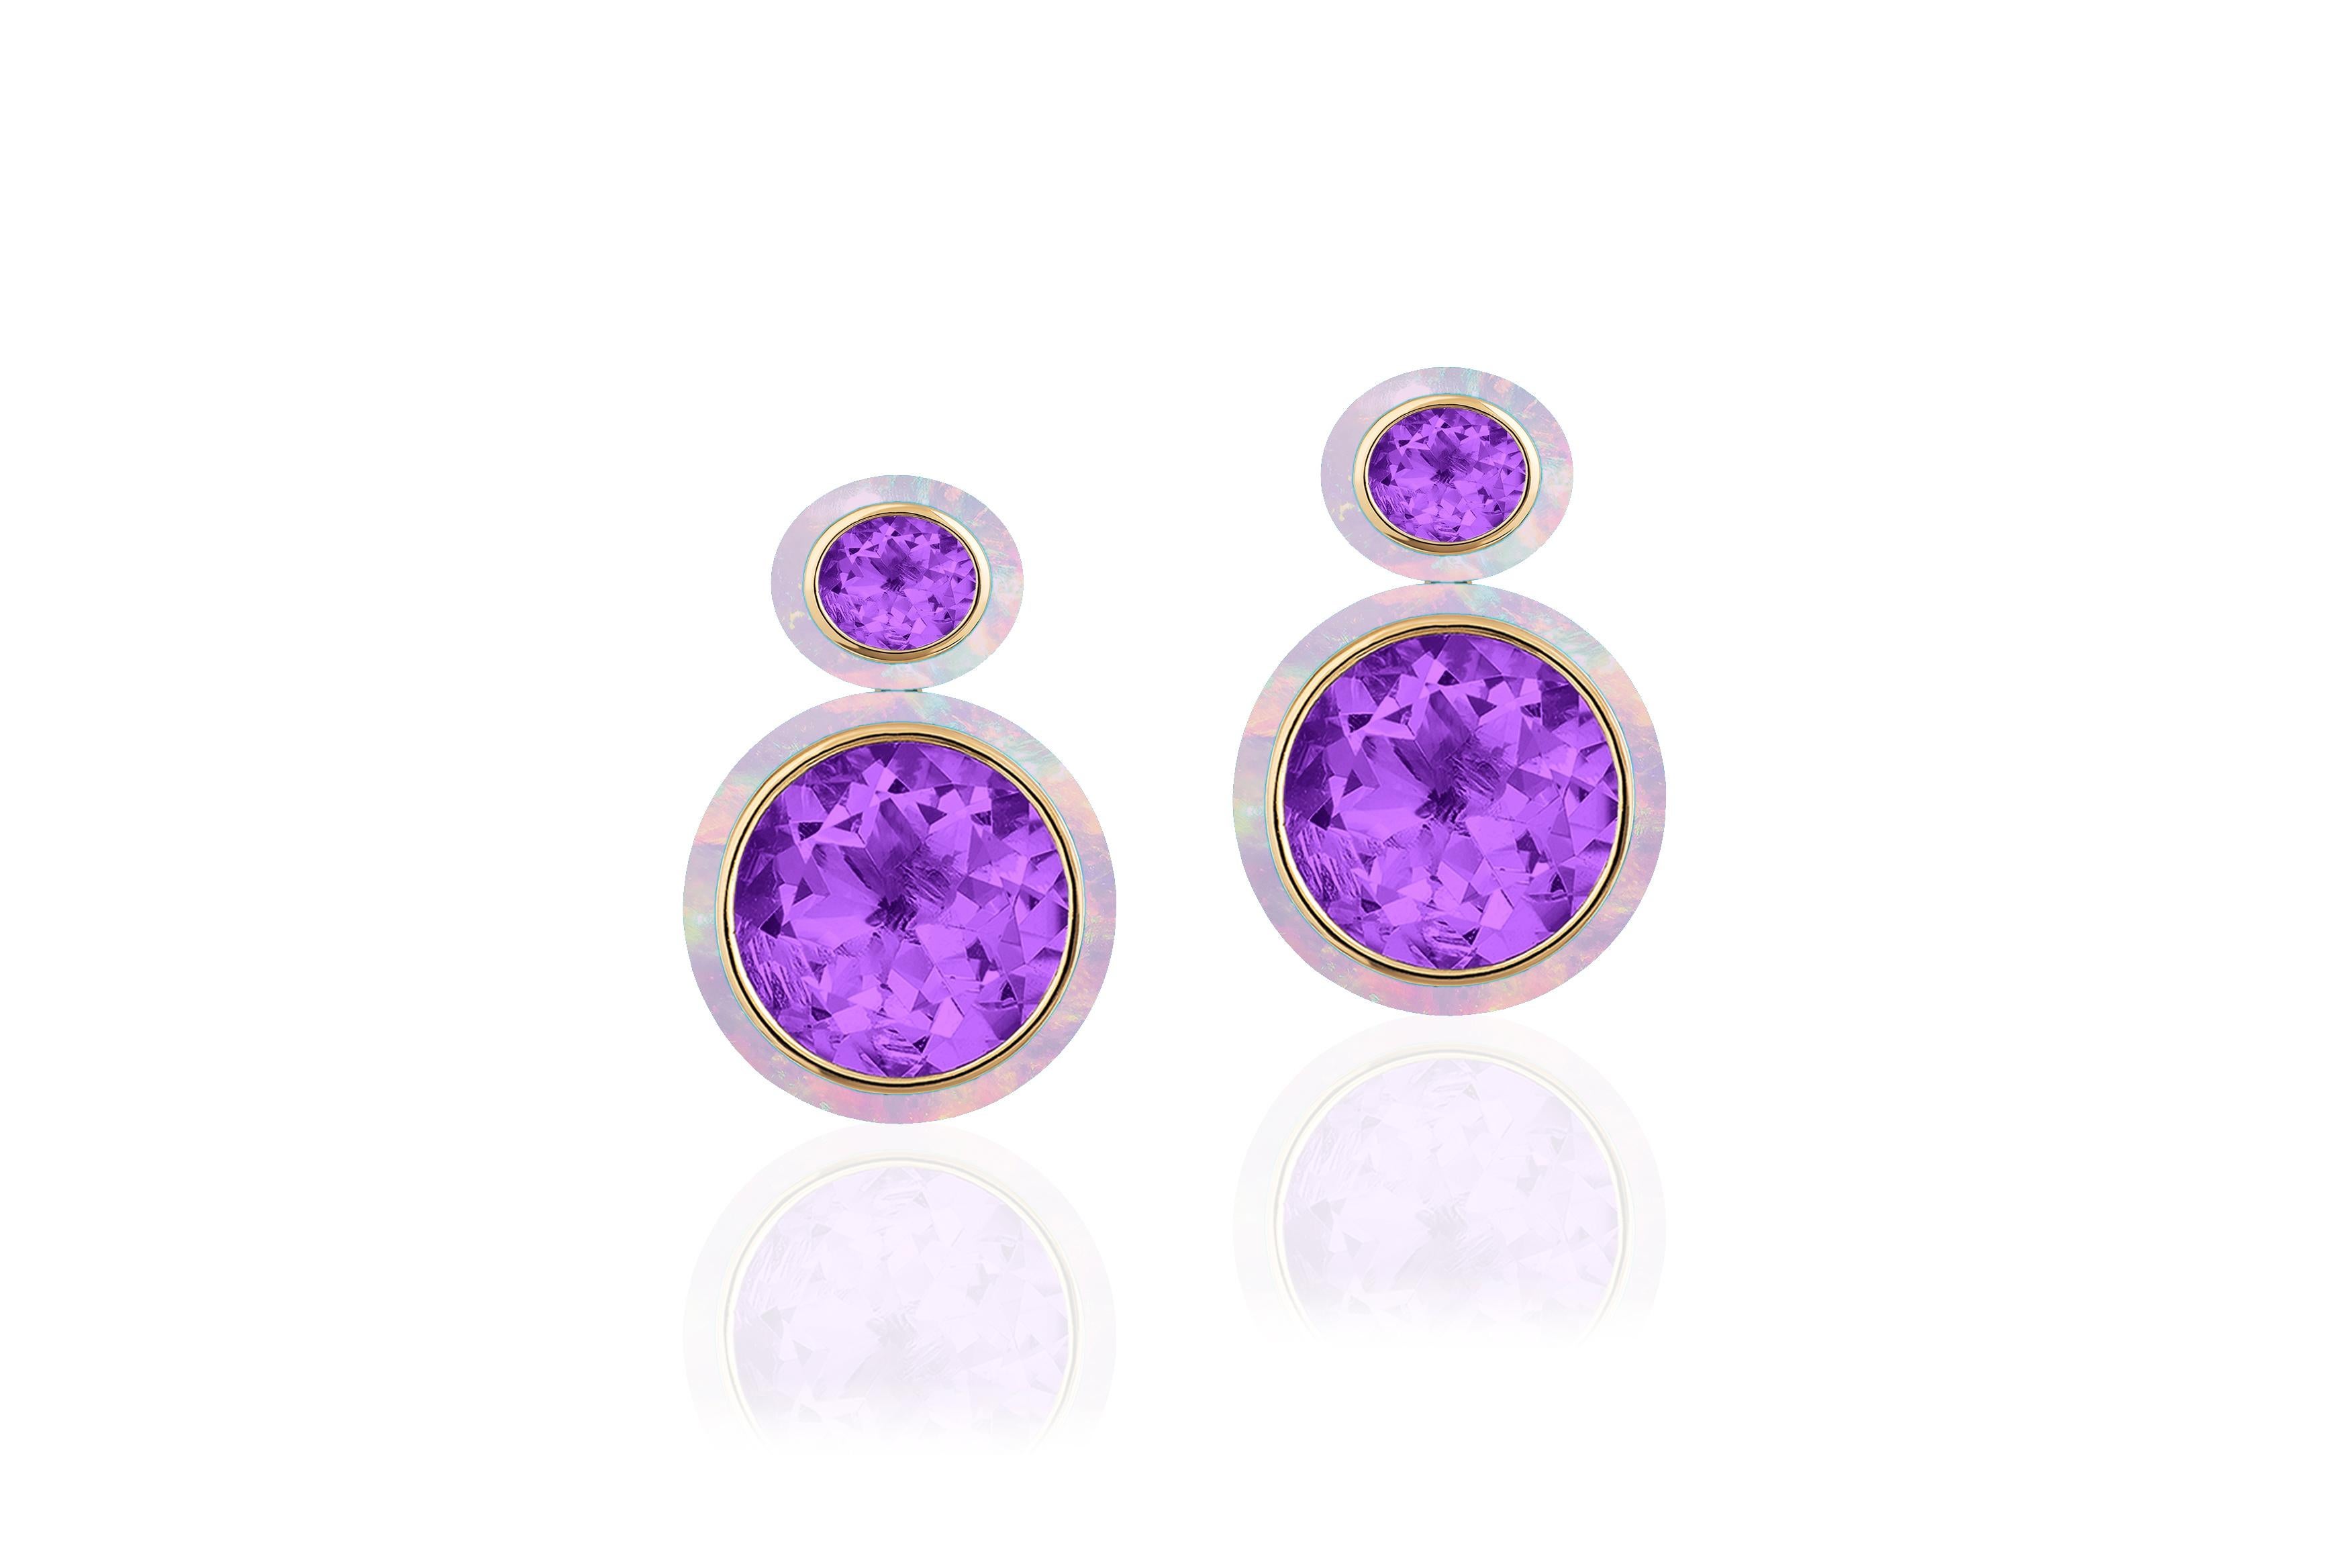 These Oval Shape Amethyst and Pink Opal Earrings in 18K Yellow Gold from the 'Melange' Collection are a stunning piece of jewelry. The earrings feature two oval-shaped Amethyst gemstones with a Pink Opal Border- set in a rich 18K yellow gold